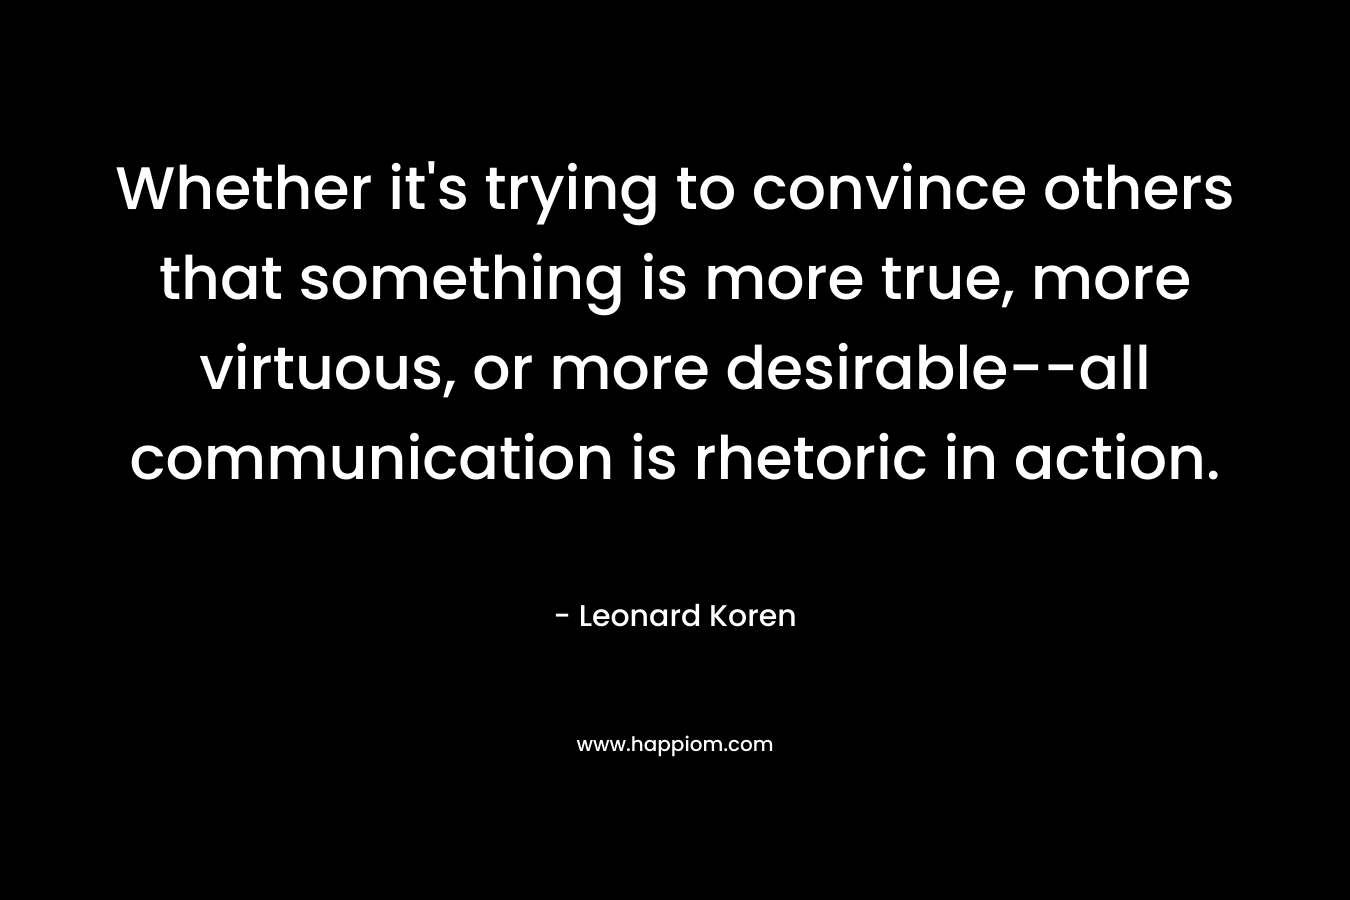 Whether it's trying to convince others that something is more true, more virtuous, or more desirable--all communication is rhetoric in action.